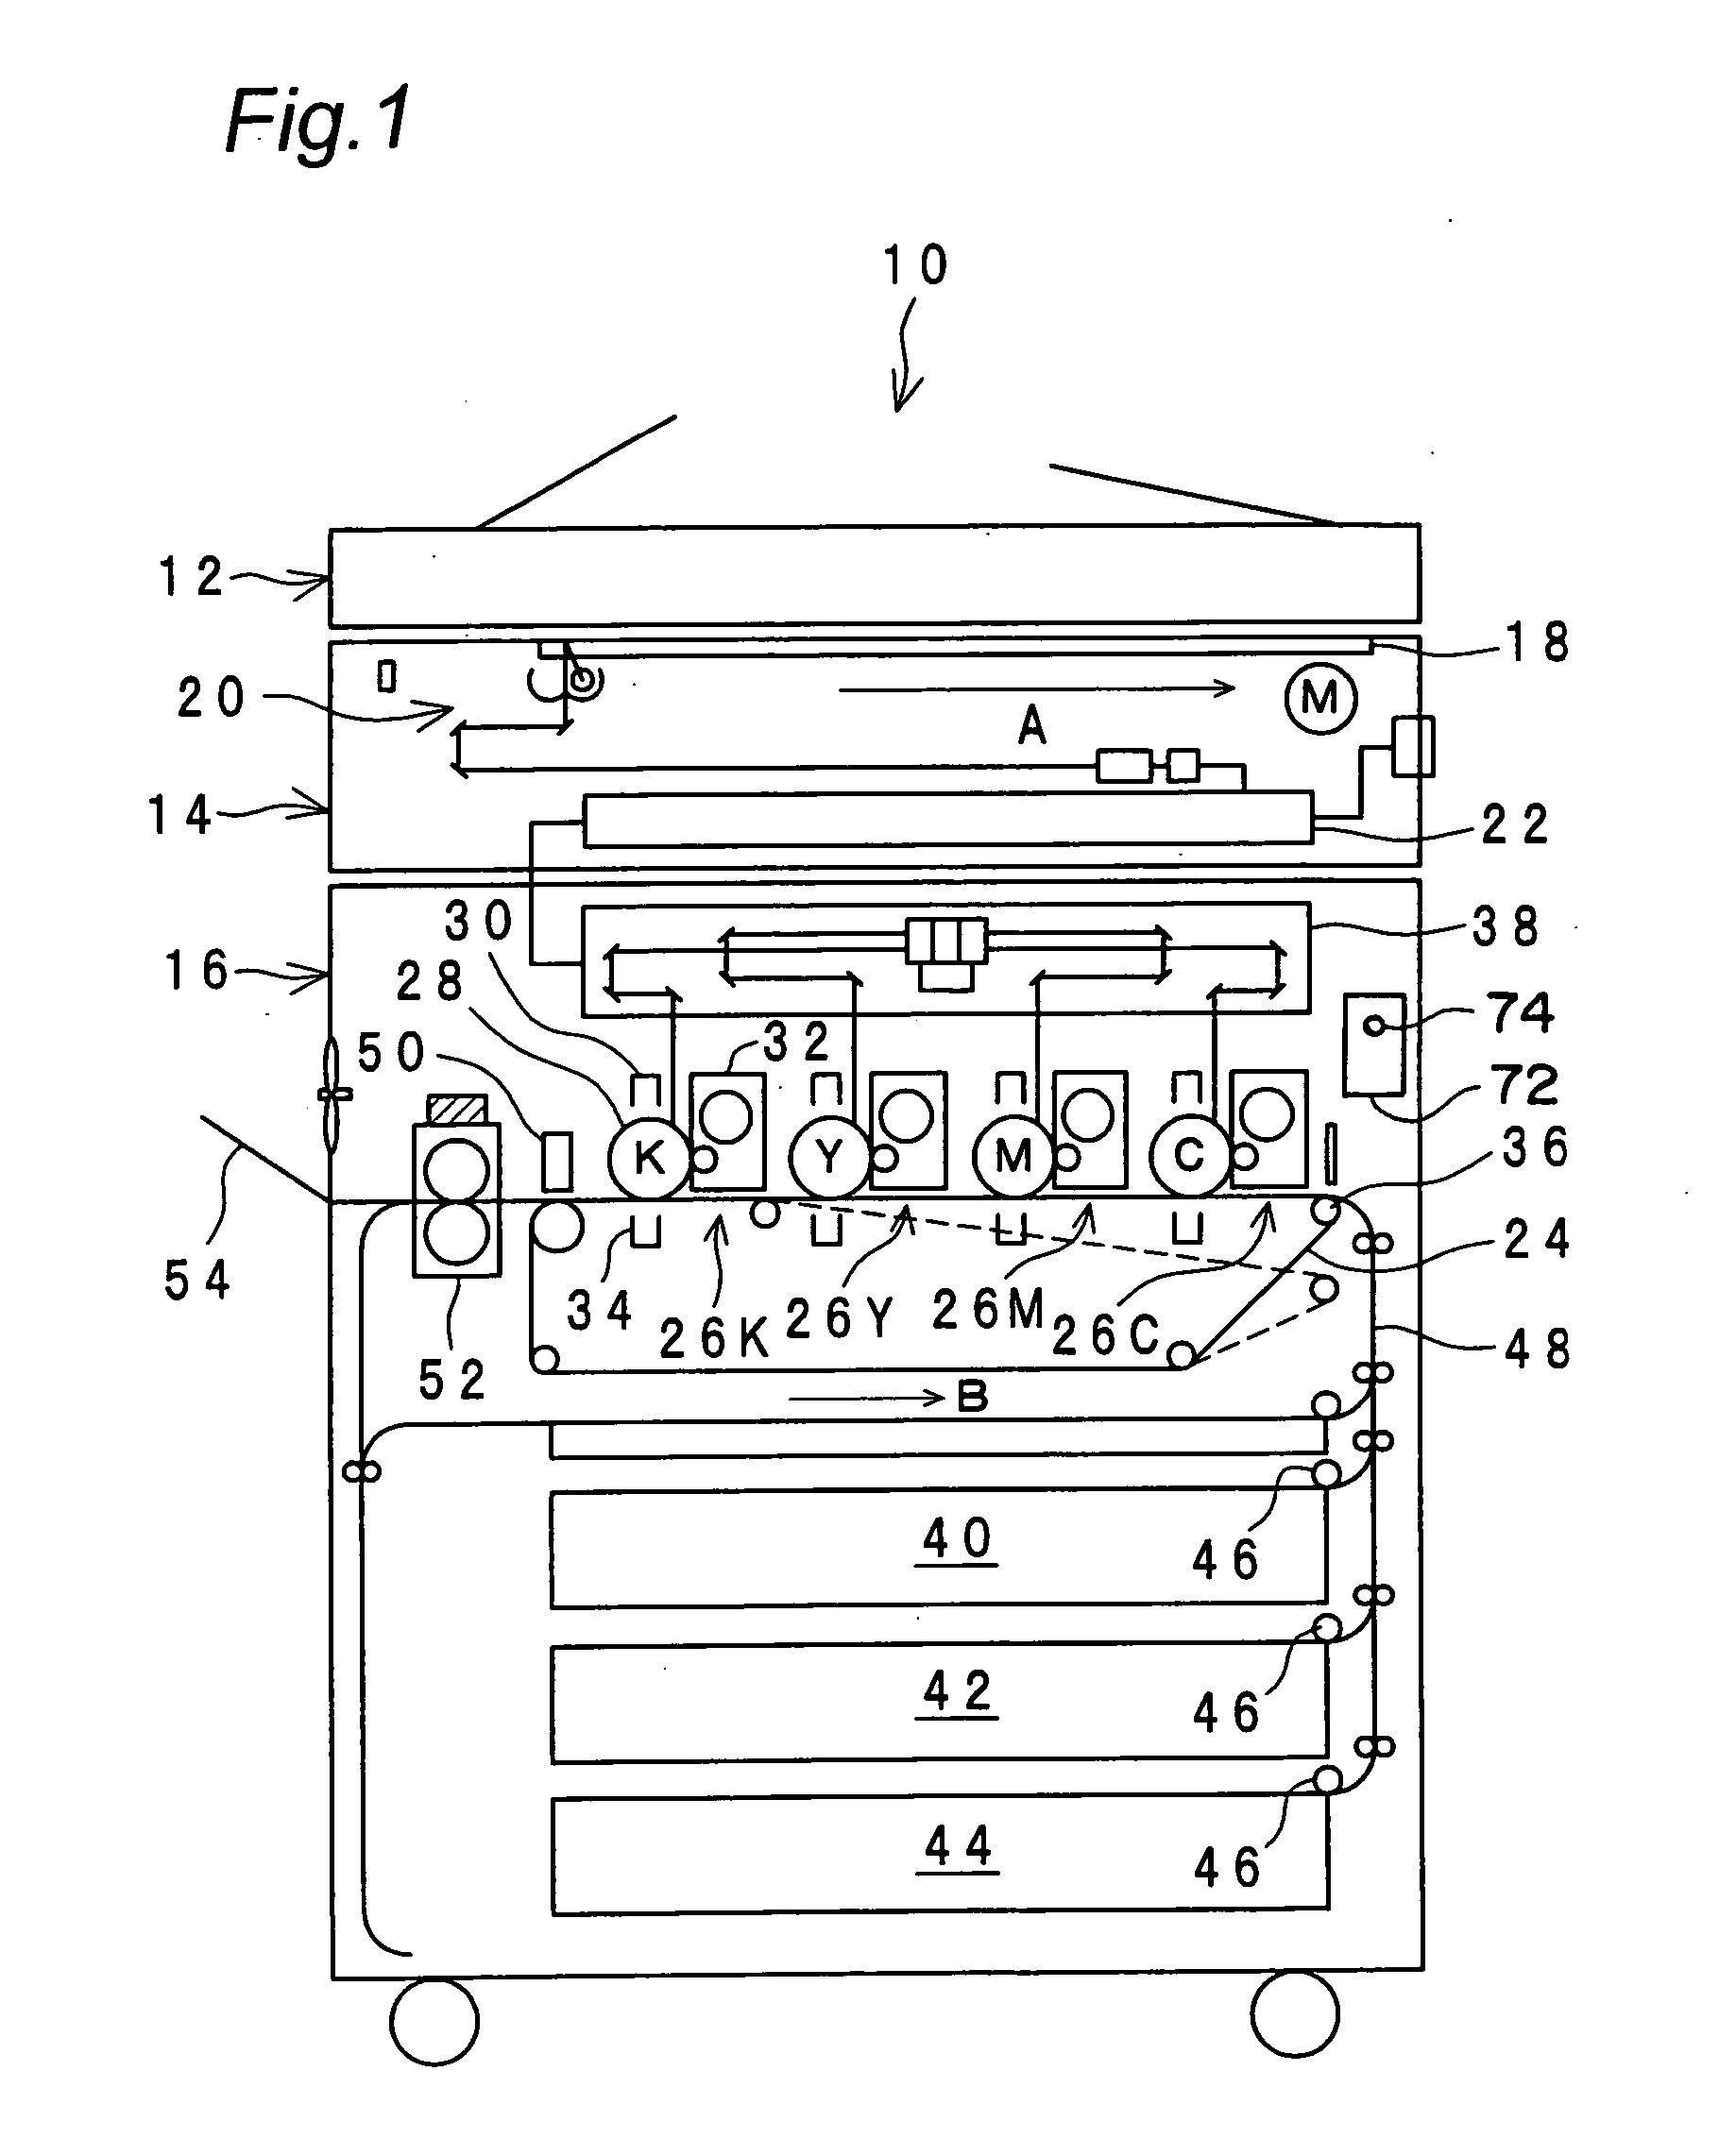 Image forming apparatus, and exposure control method therefor